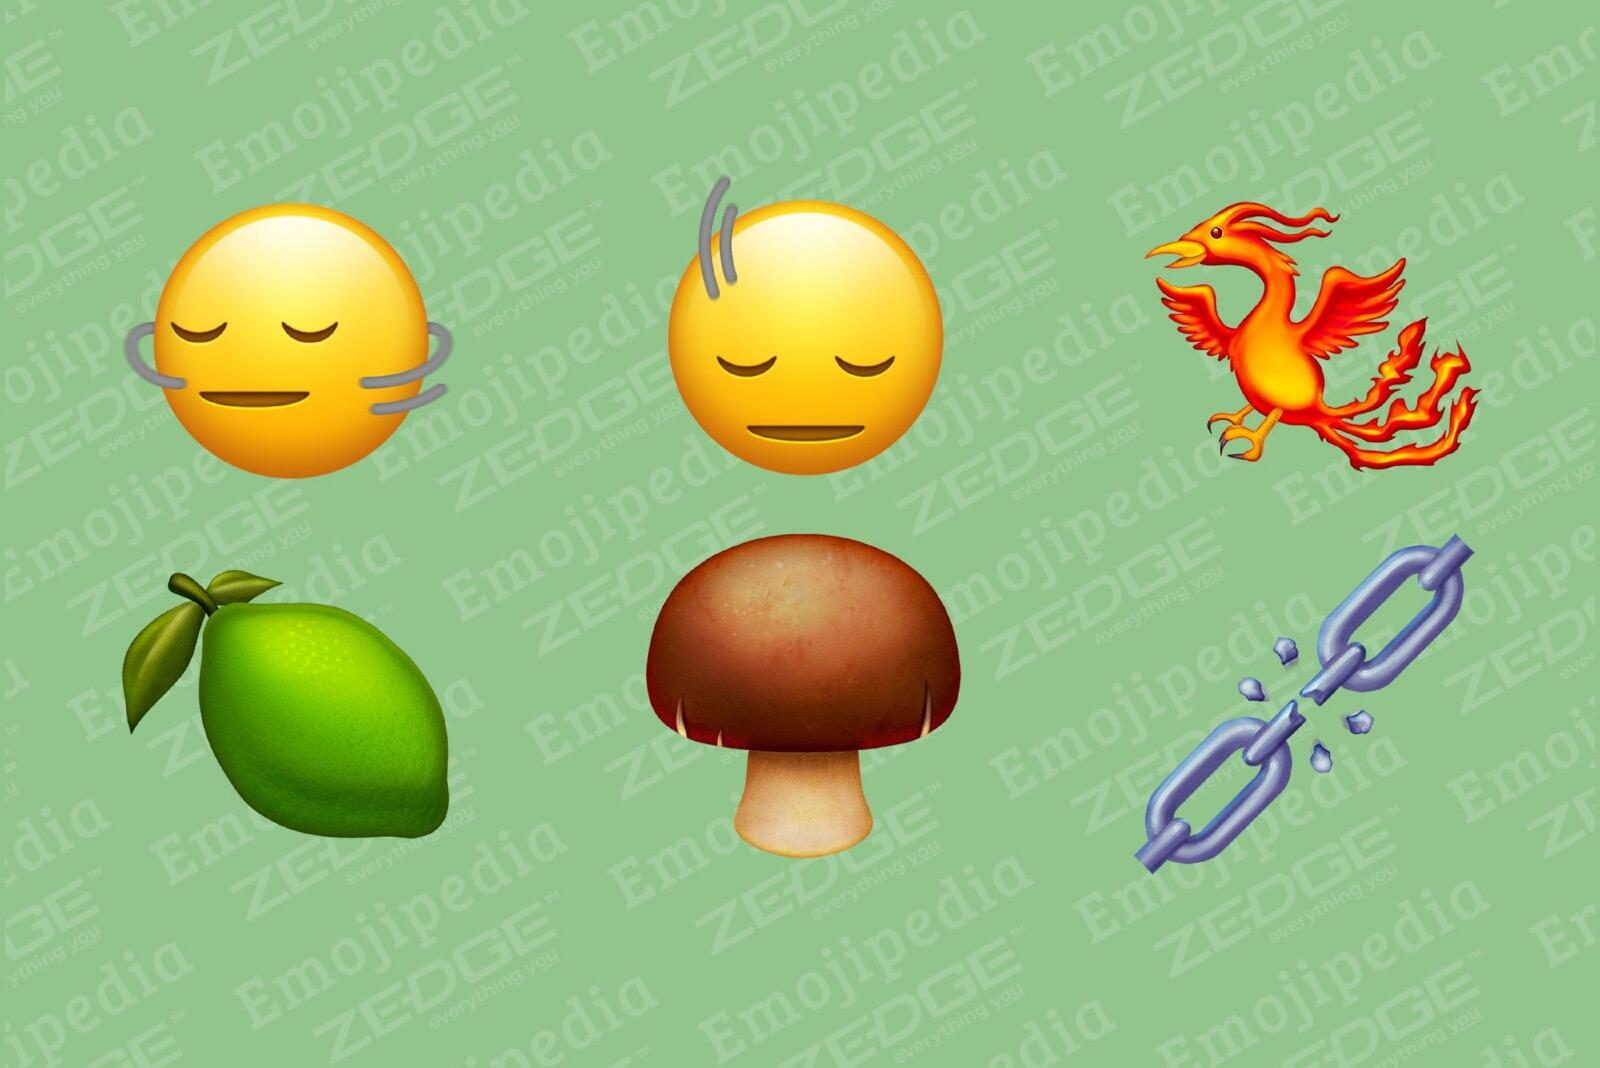 More information about "New Emojis in 2023-2024"